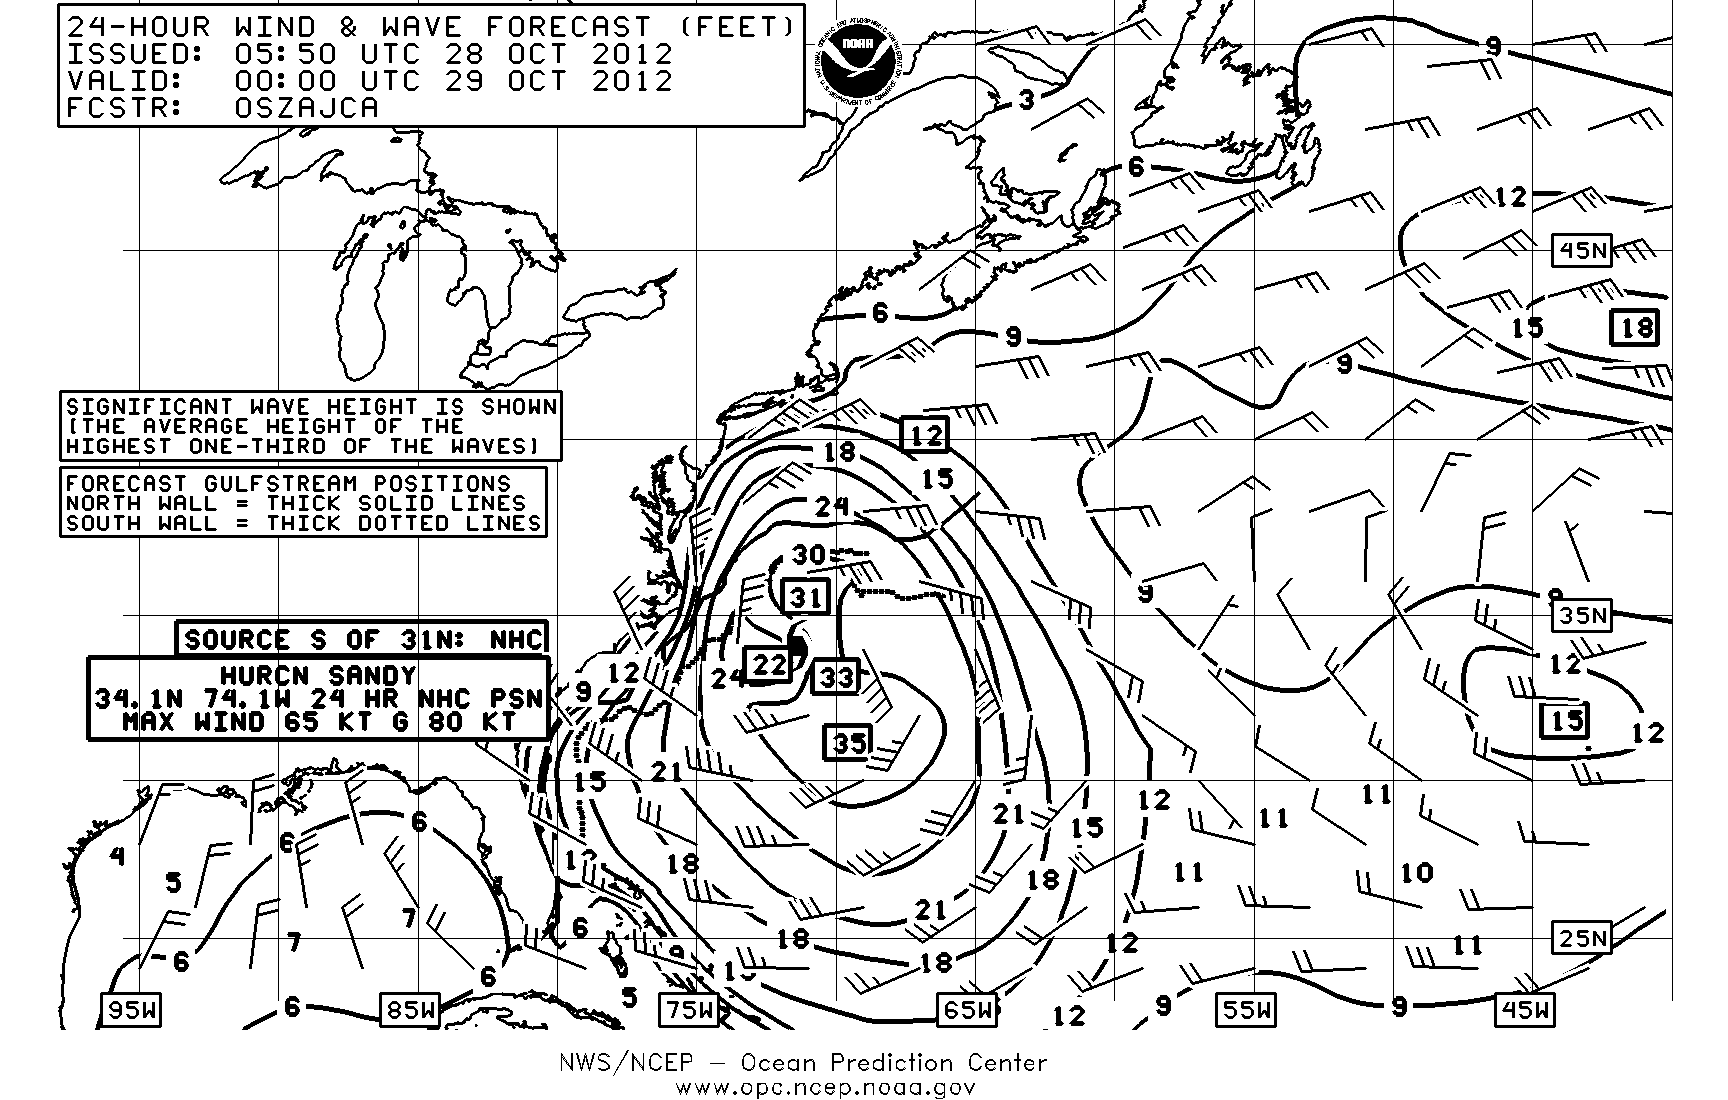 24 Hour West Atlantic Wind and Wave Forecast